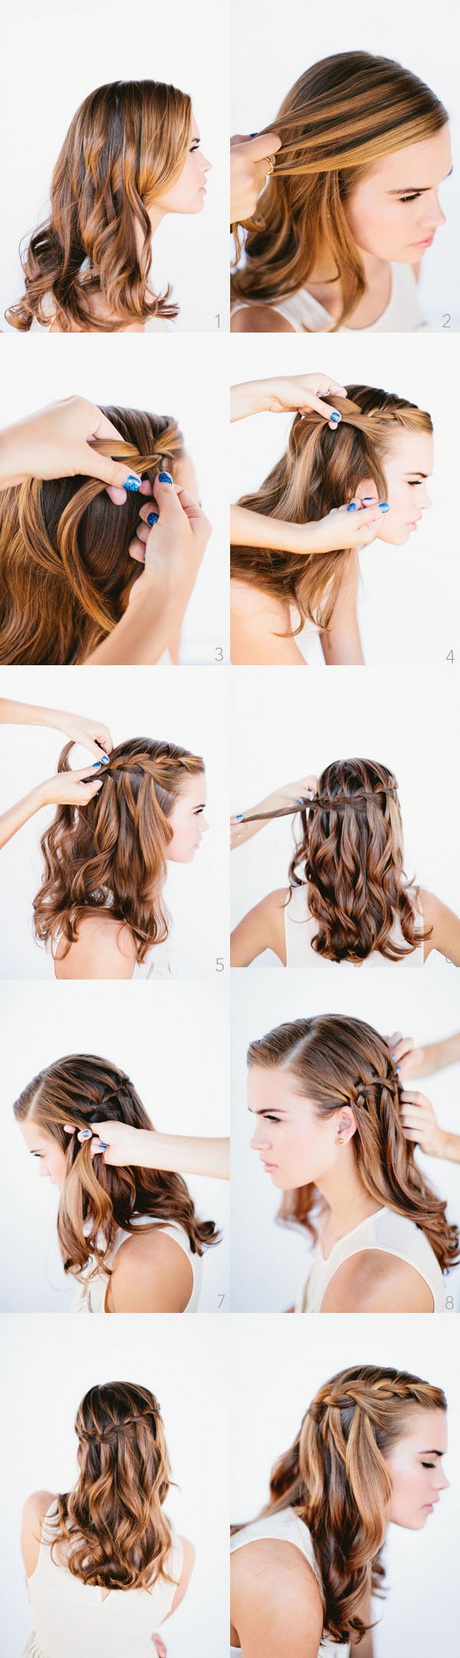 Hairstyles for long hair step by step